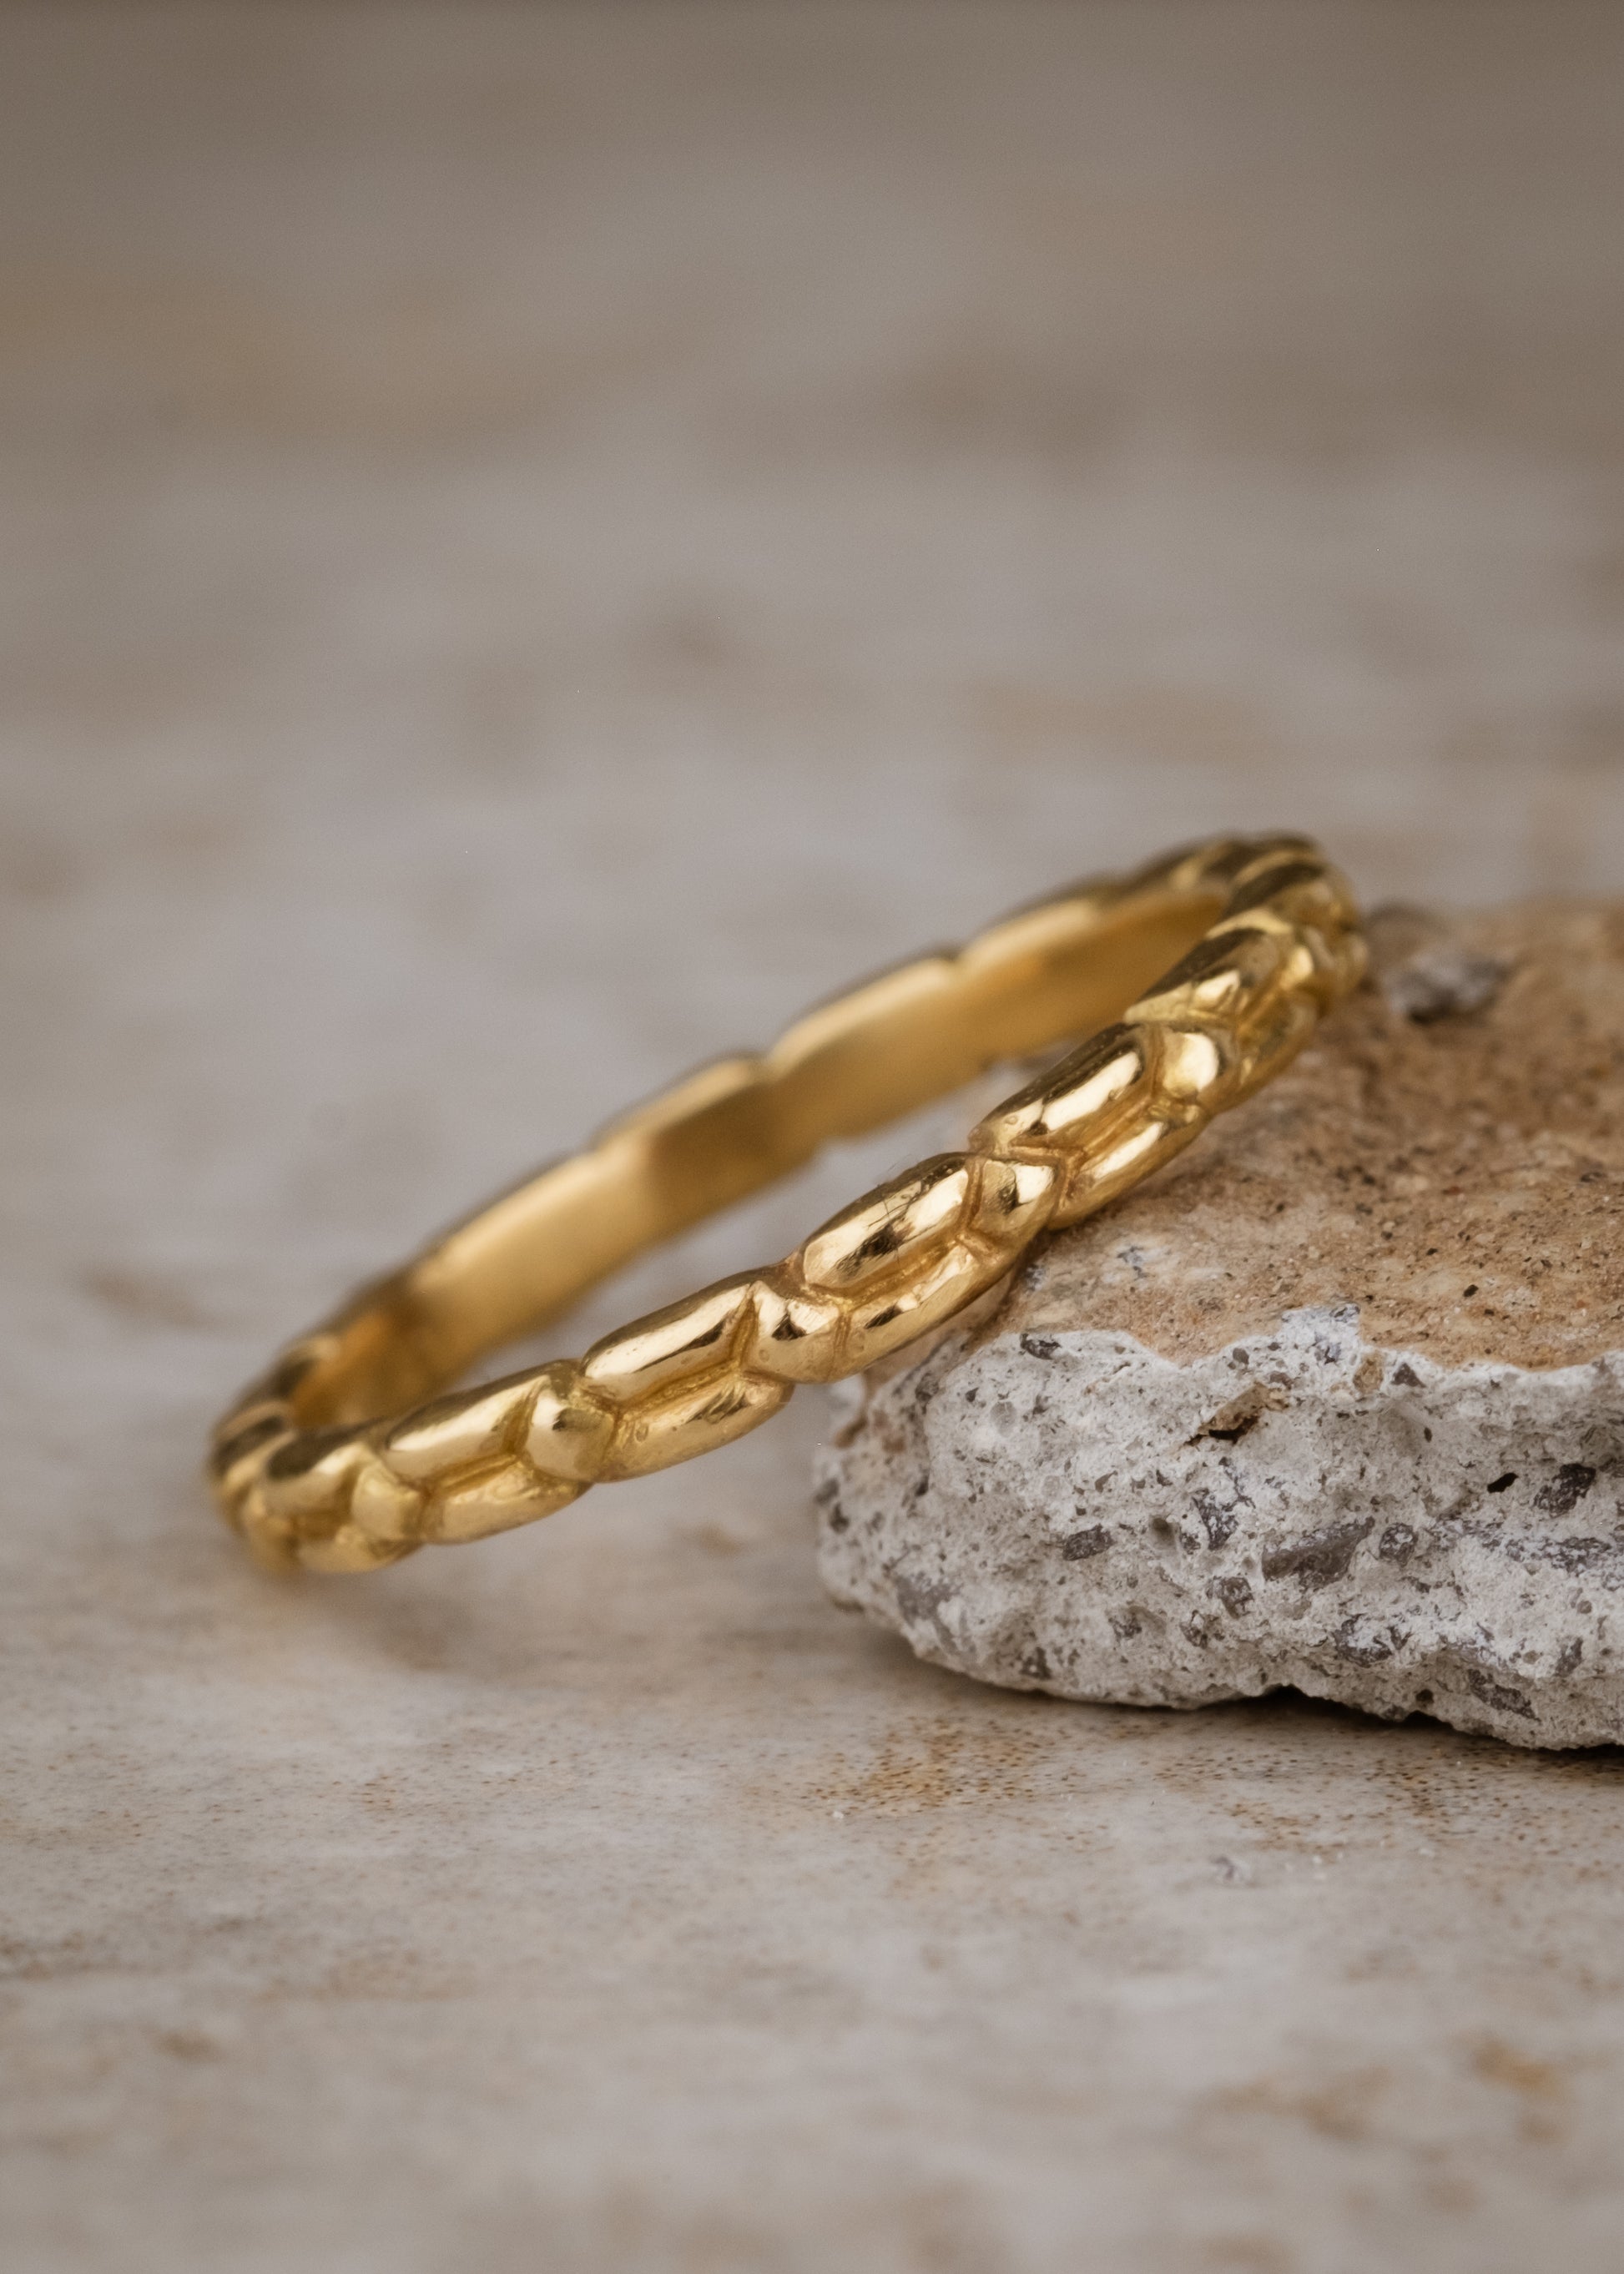 An intricately carved gold band, the Lariat ring is a study in texture—a classic piece rich in craftsmanship. 